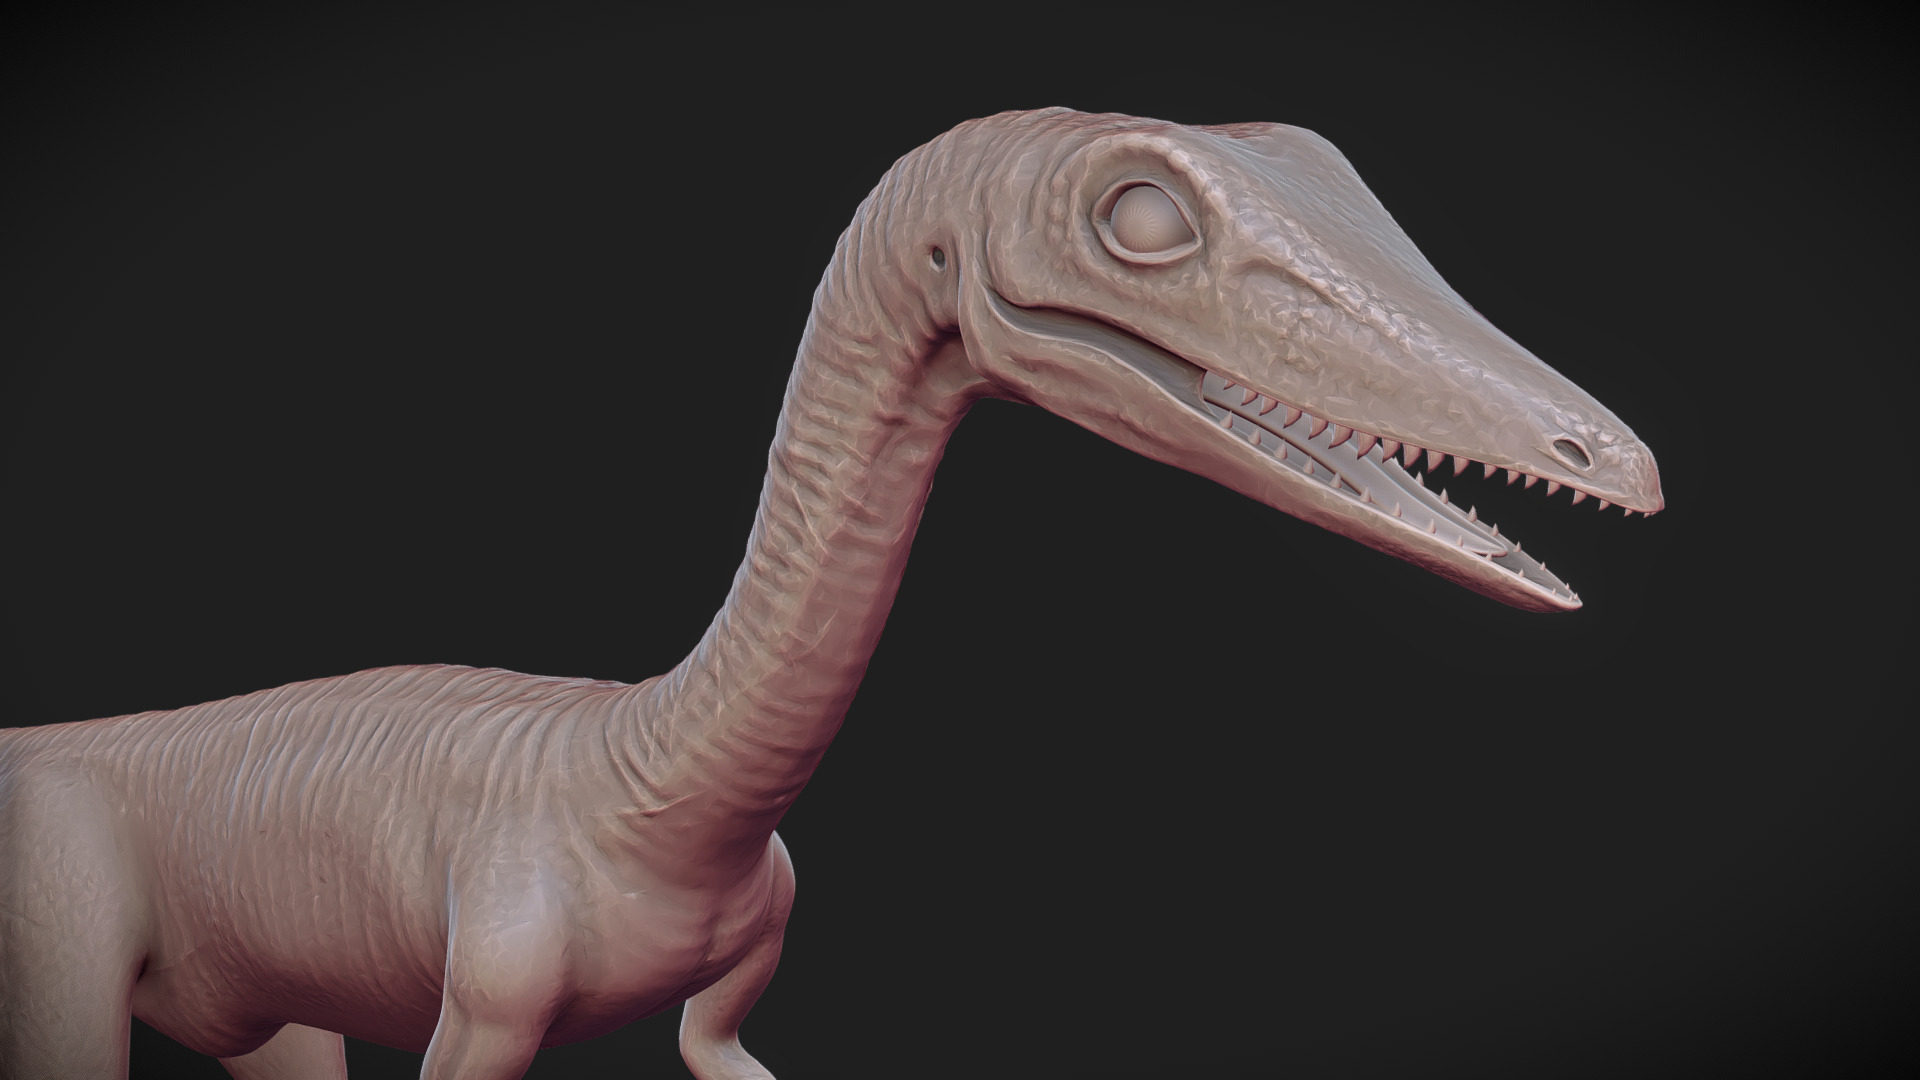 3D model 3d Printable Model – Compsognathus - This is a 3D model of the 3d Printable Model - Compsognathus. The 3D model is about a lizard with a long neck.